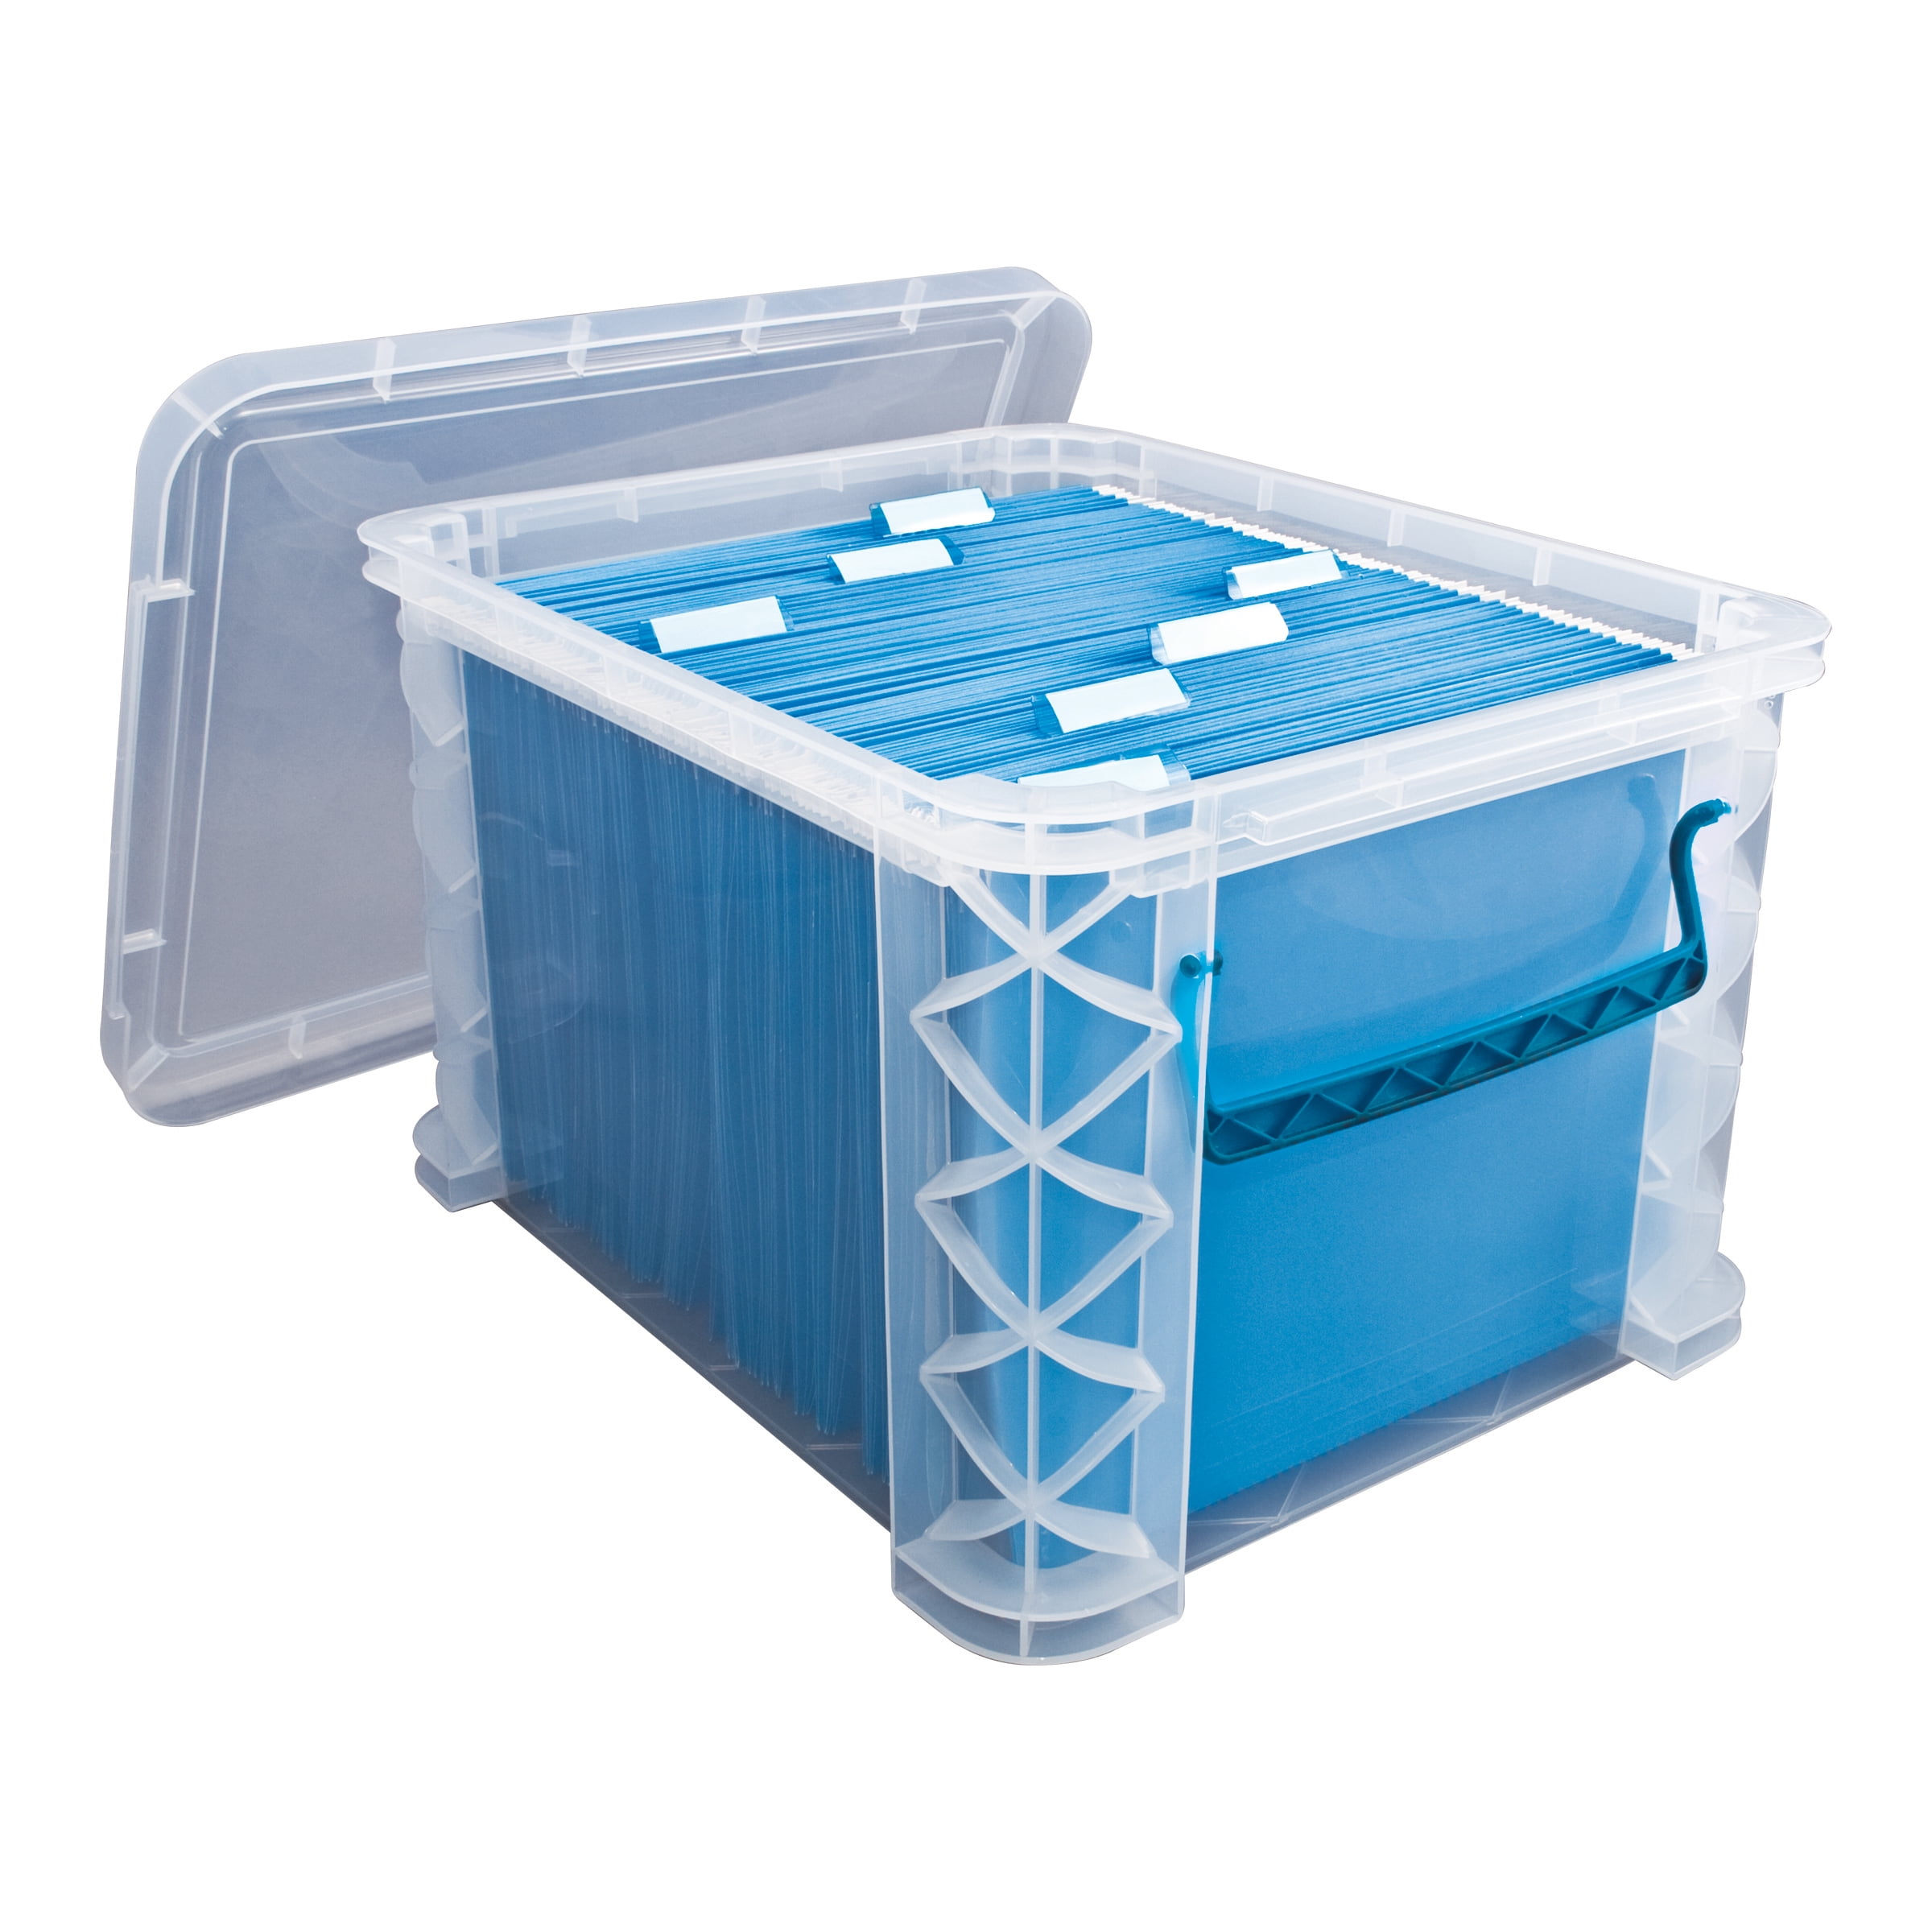 Superb Quality 12x12 storage box With Luring Discounts 